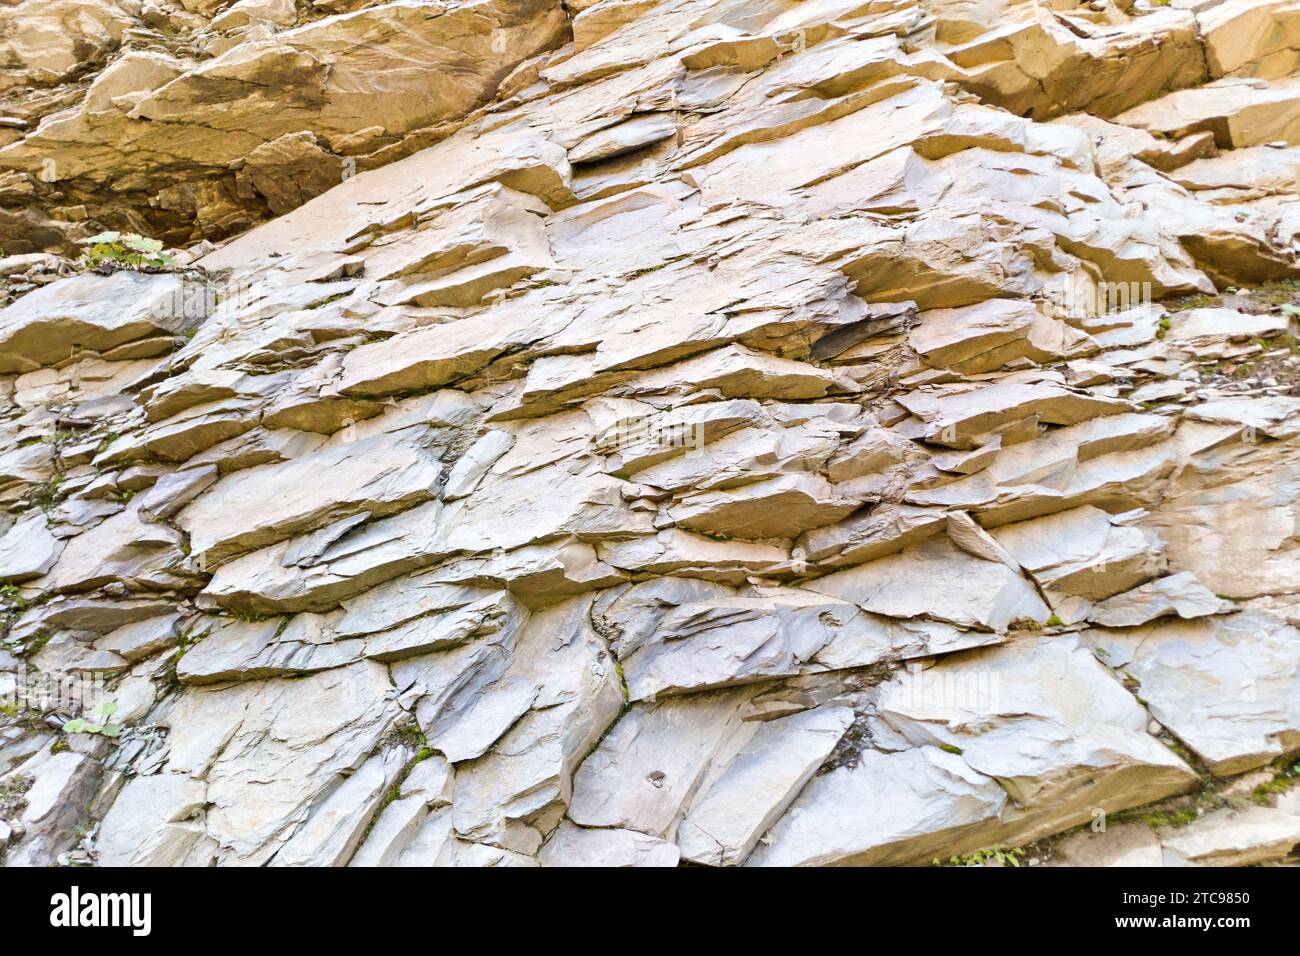 Rock stones texture abstract background Stock Photo